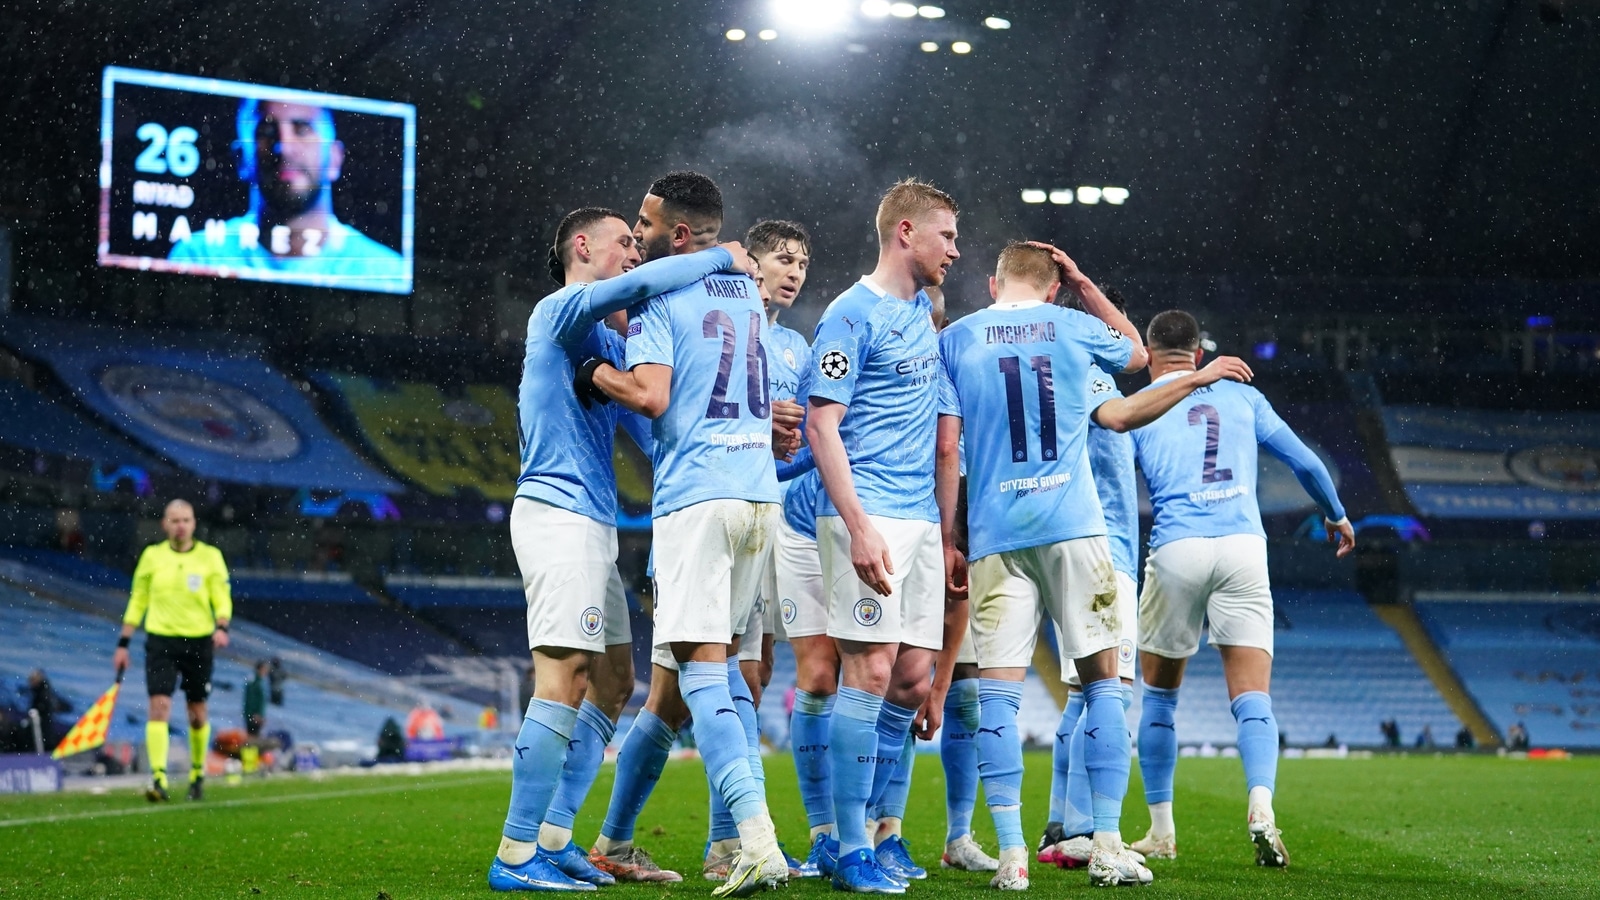 Man City ousts PSG to reach first Champions League final  Football